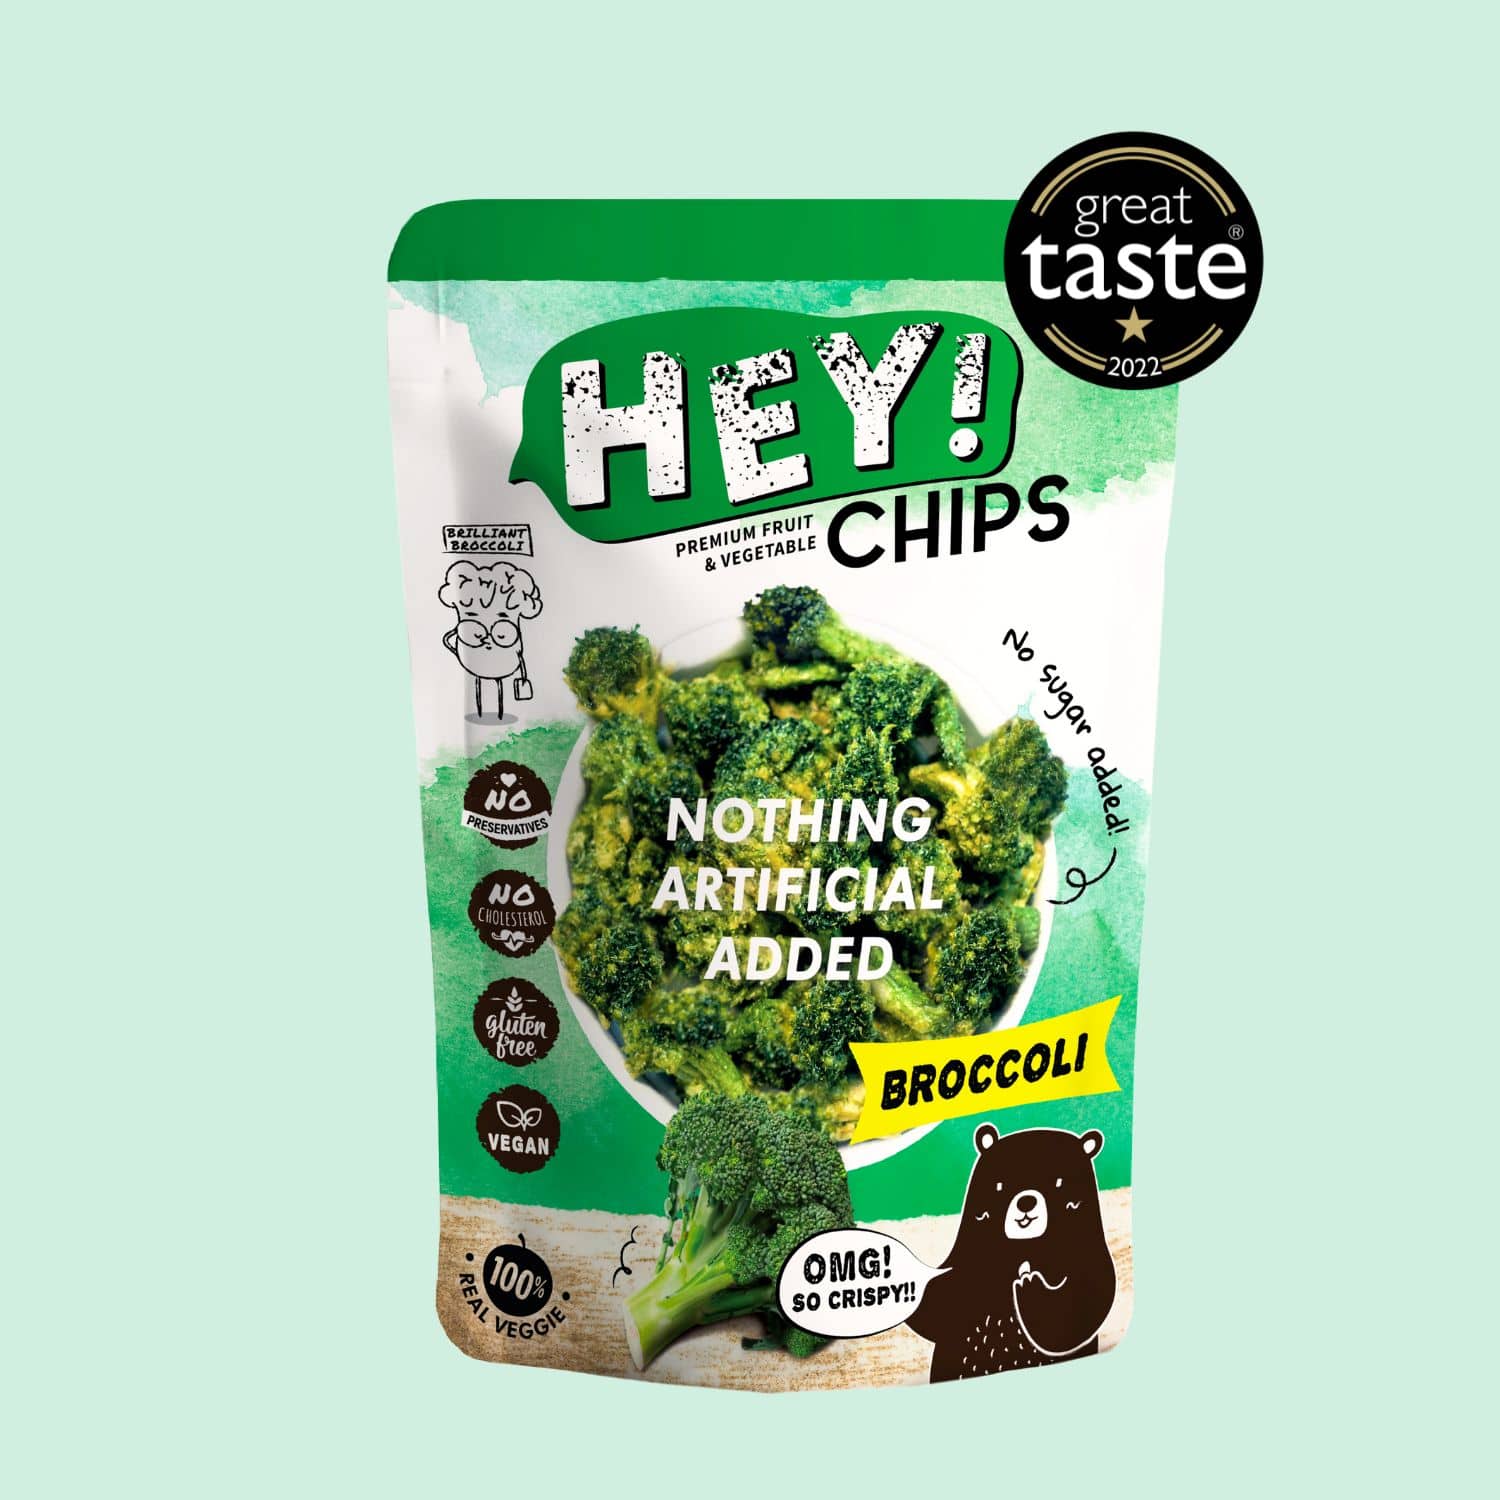 100% Natural Hey! Chips Broccoli which is Gluten-Free, Halal-Certified, Vegetarian, Vegan, Dairy-free